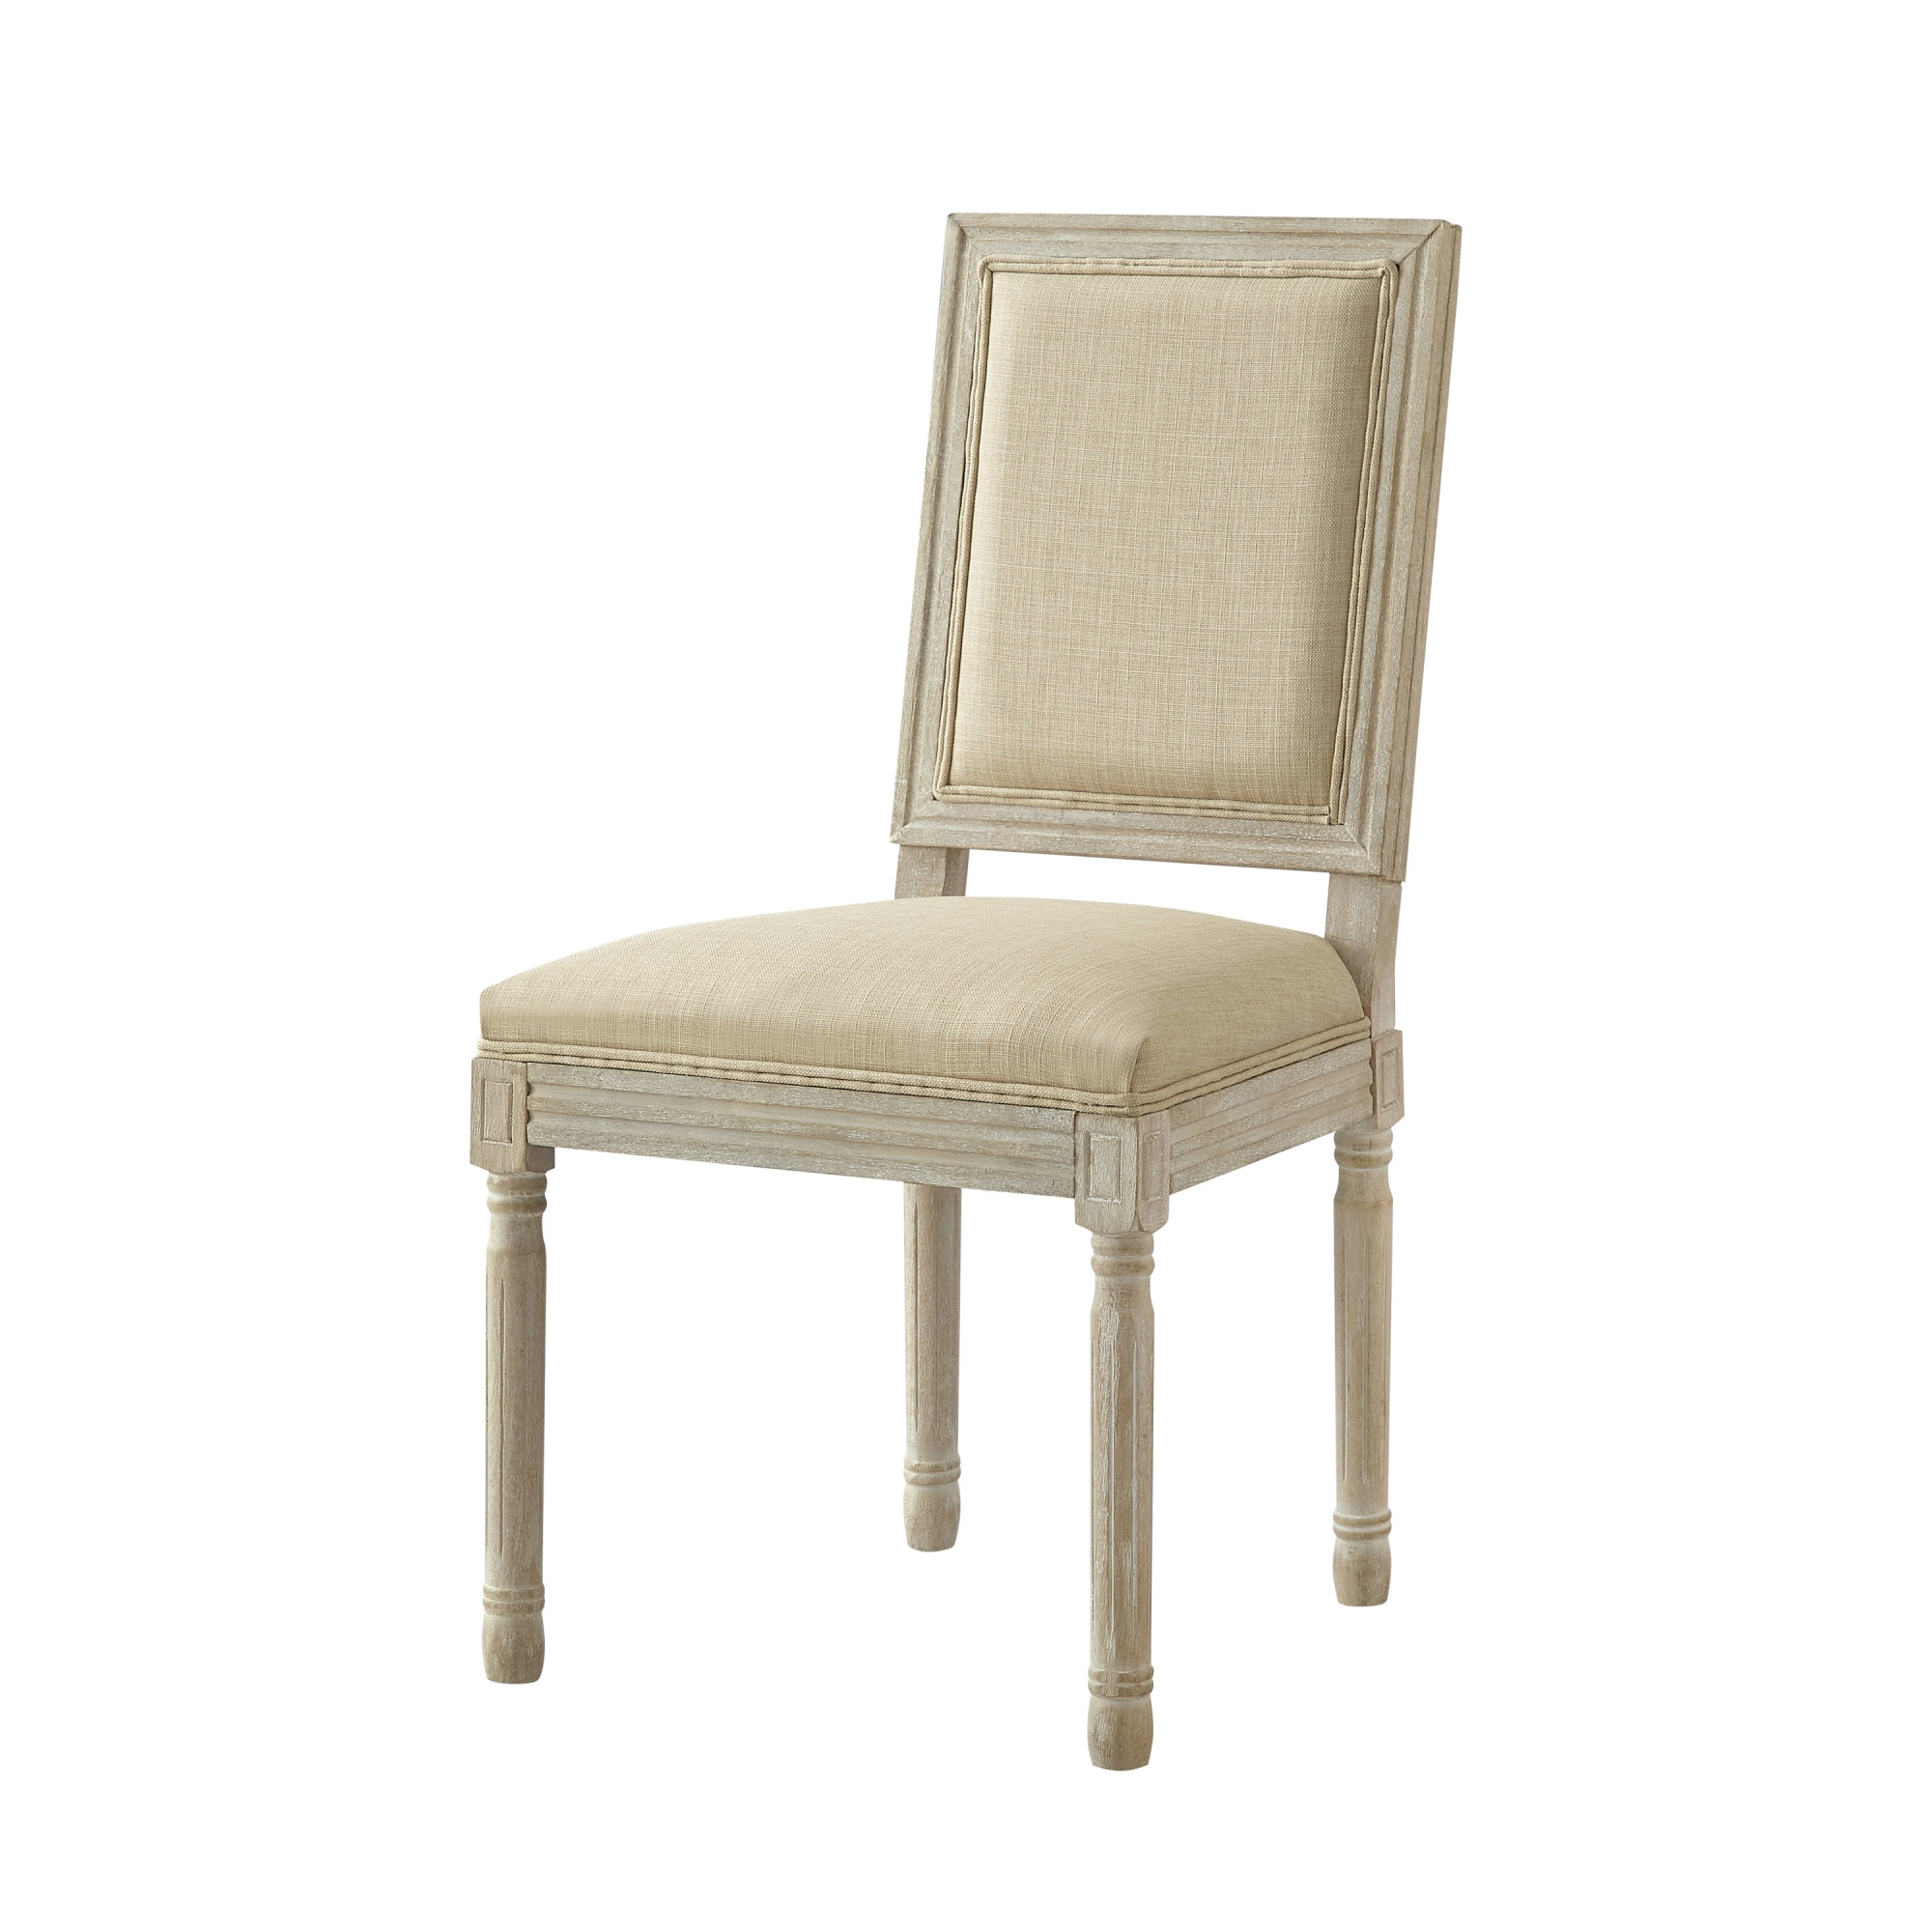 Set of Two Beige and Brown Upholstered Linen Dining Side Chairs-535362-1